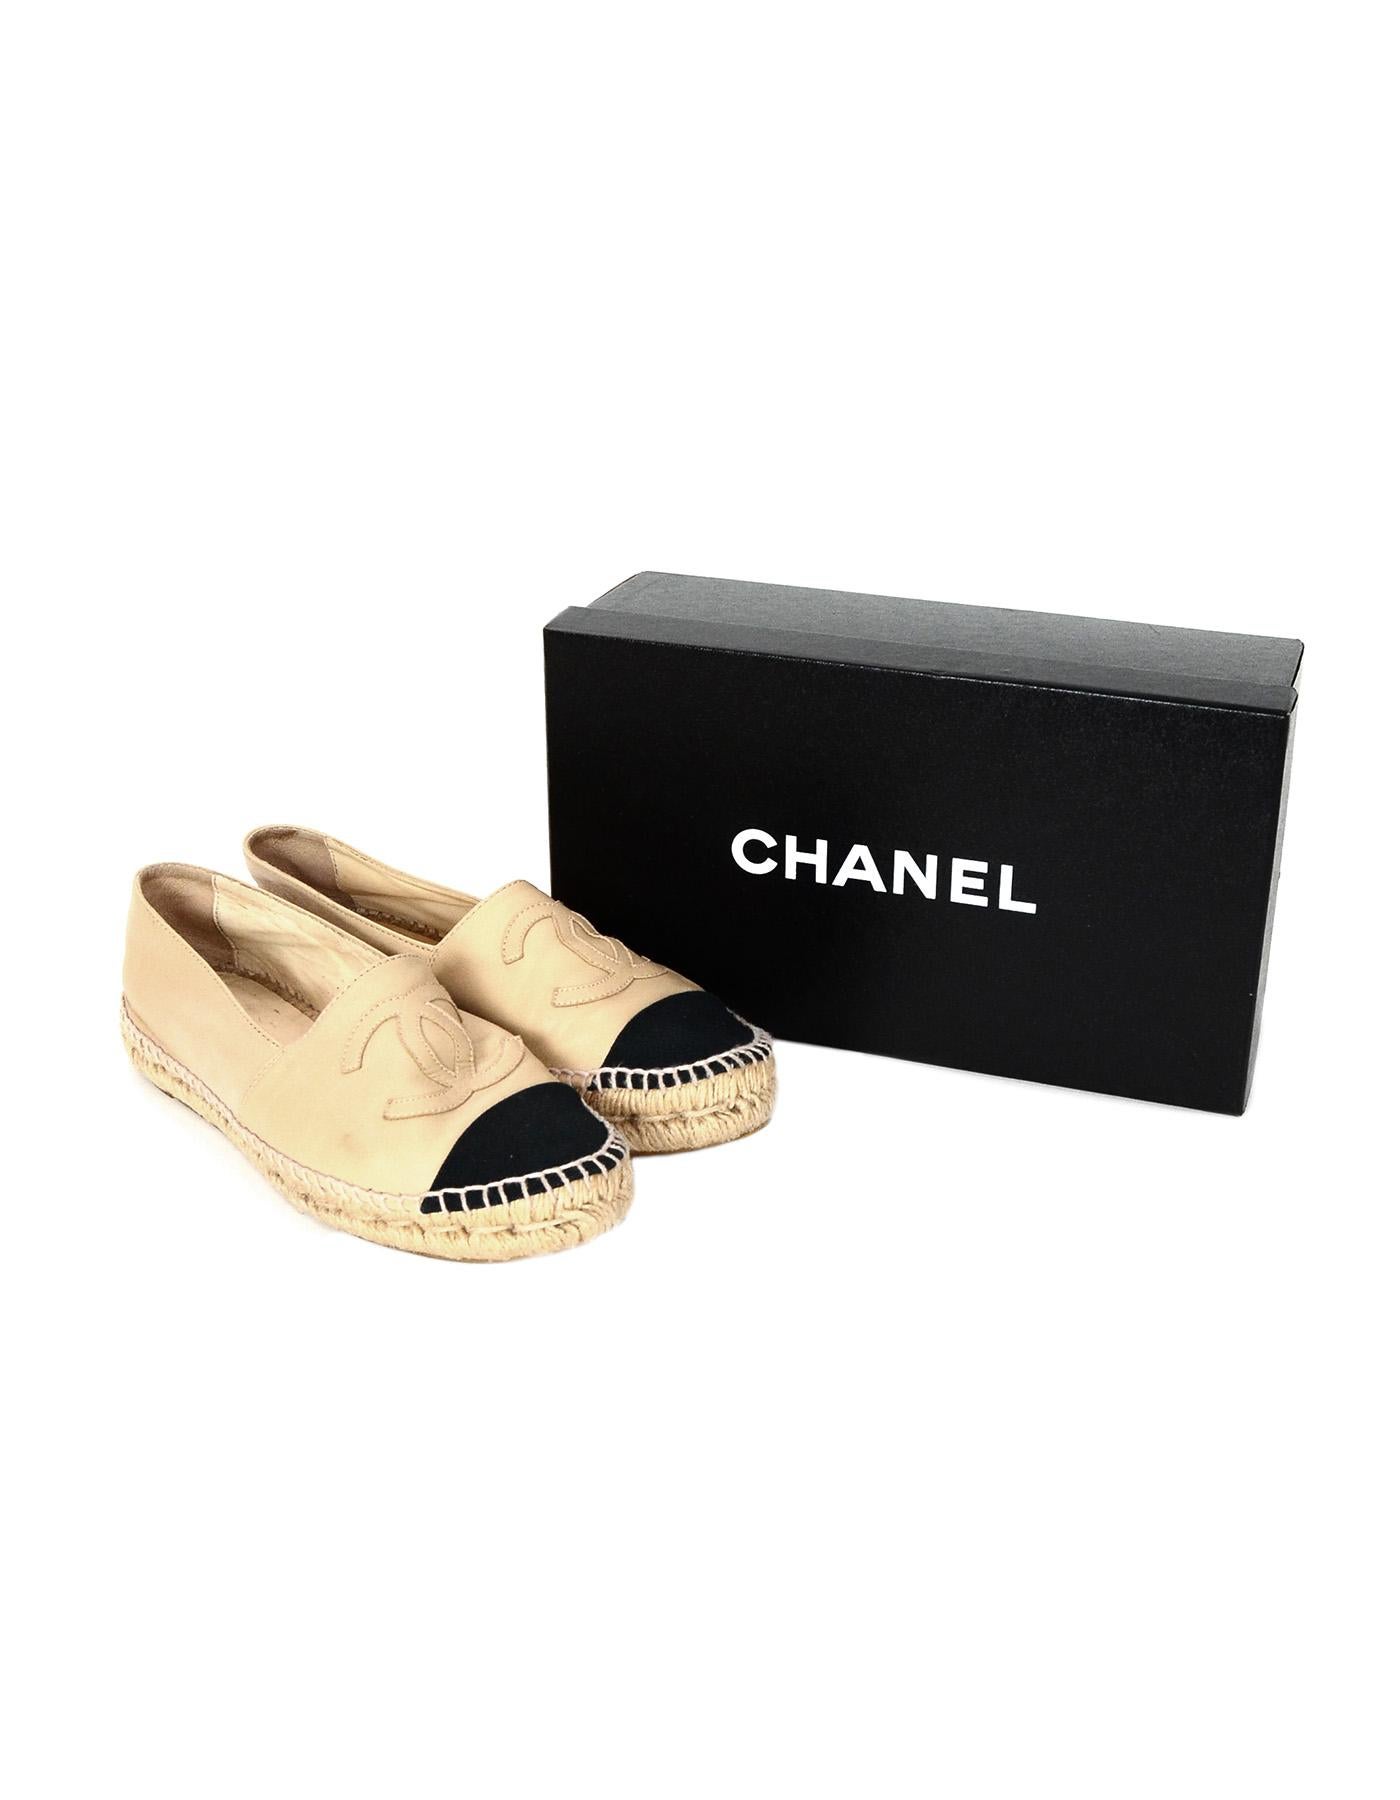 Chanel Tan/Black Leather/Canvas Espadrille Cap Toe Shoes Sz 38

Made In: Spain
Color: Tan and black
Materials: Leather and canvas
Closure/Opening: Slide on
Overall Condition: Very good pre-owned condition with exception of some markings in leather